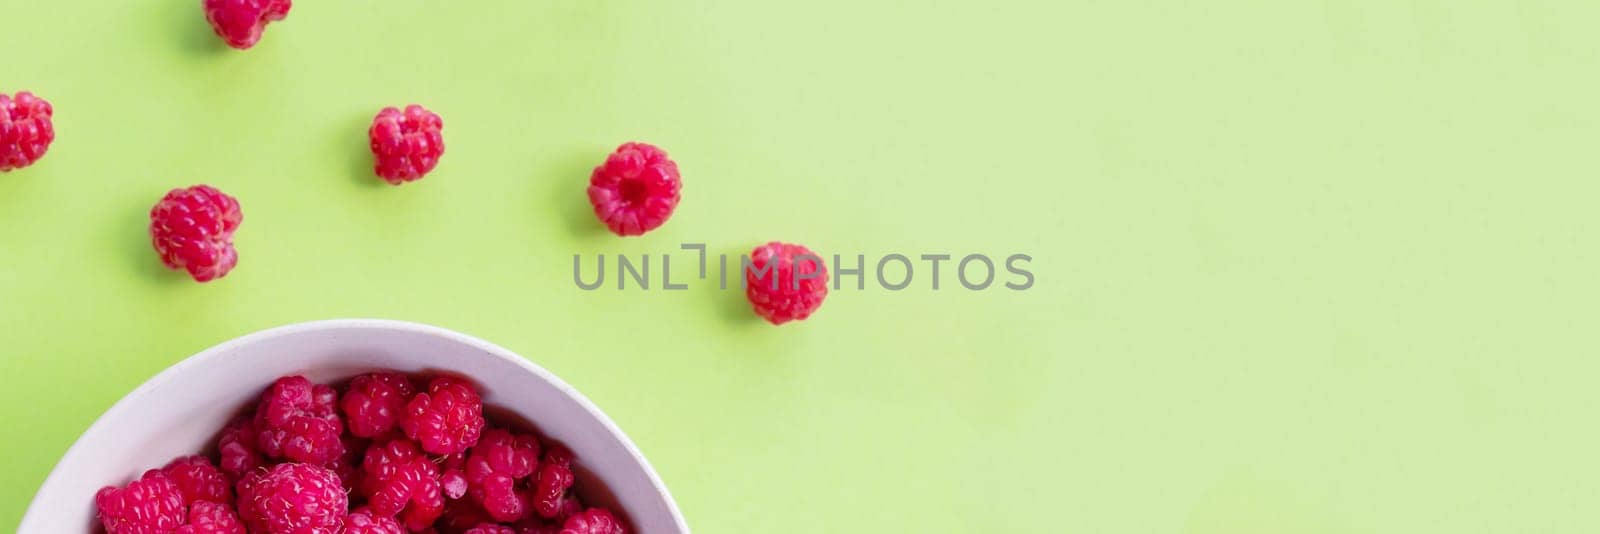 Red raspberry berry in plate on stone table. Fruit berries background. Summer food background.